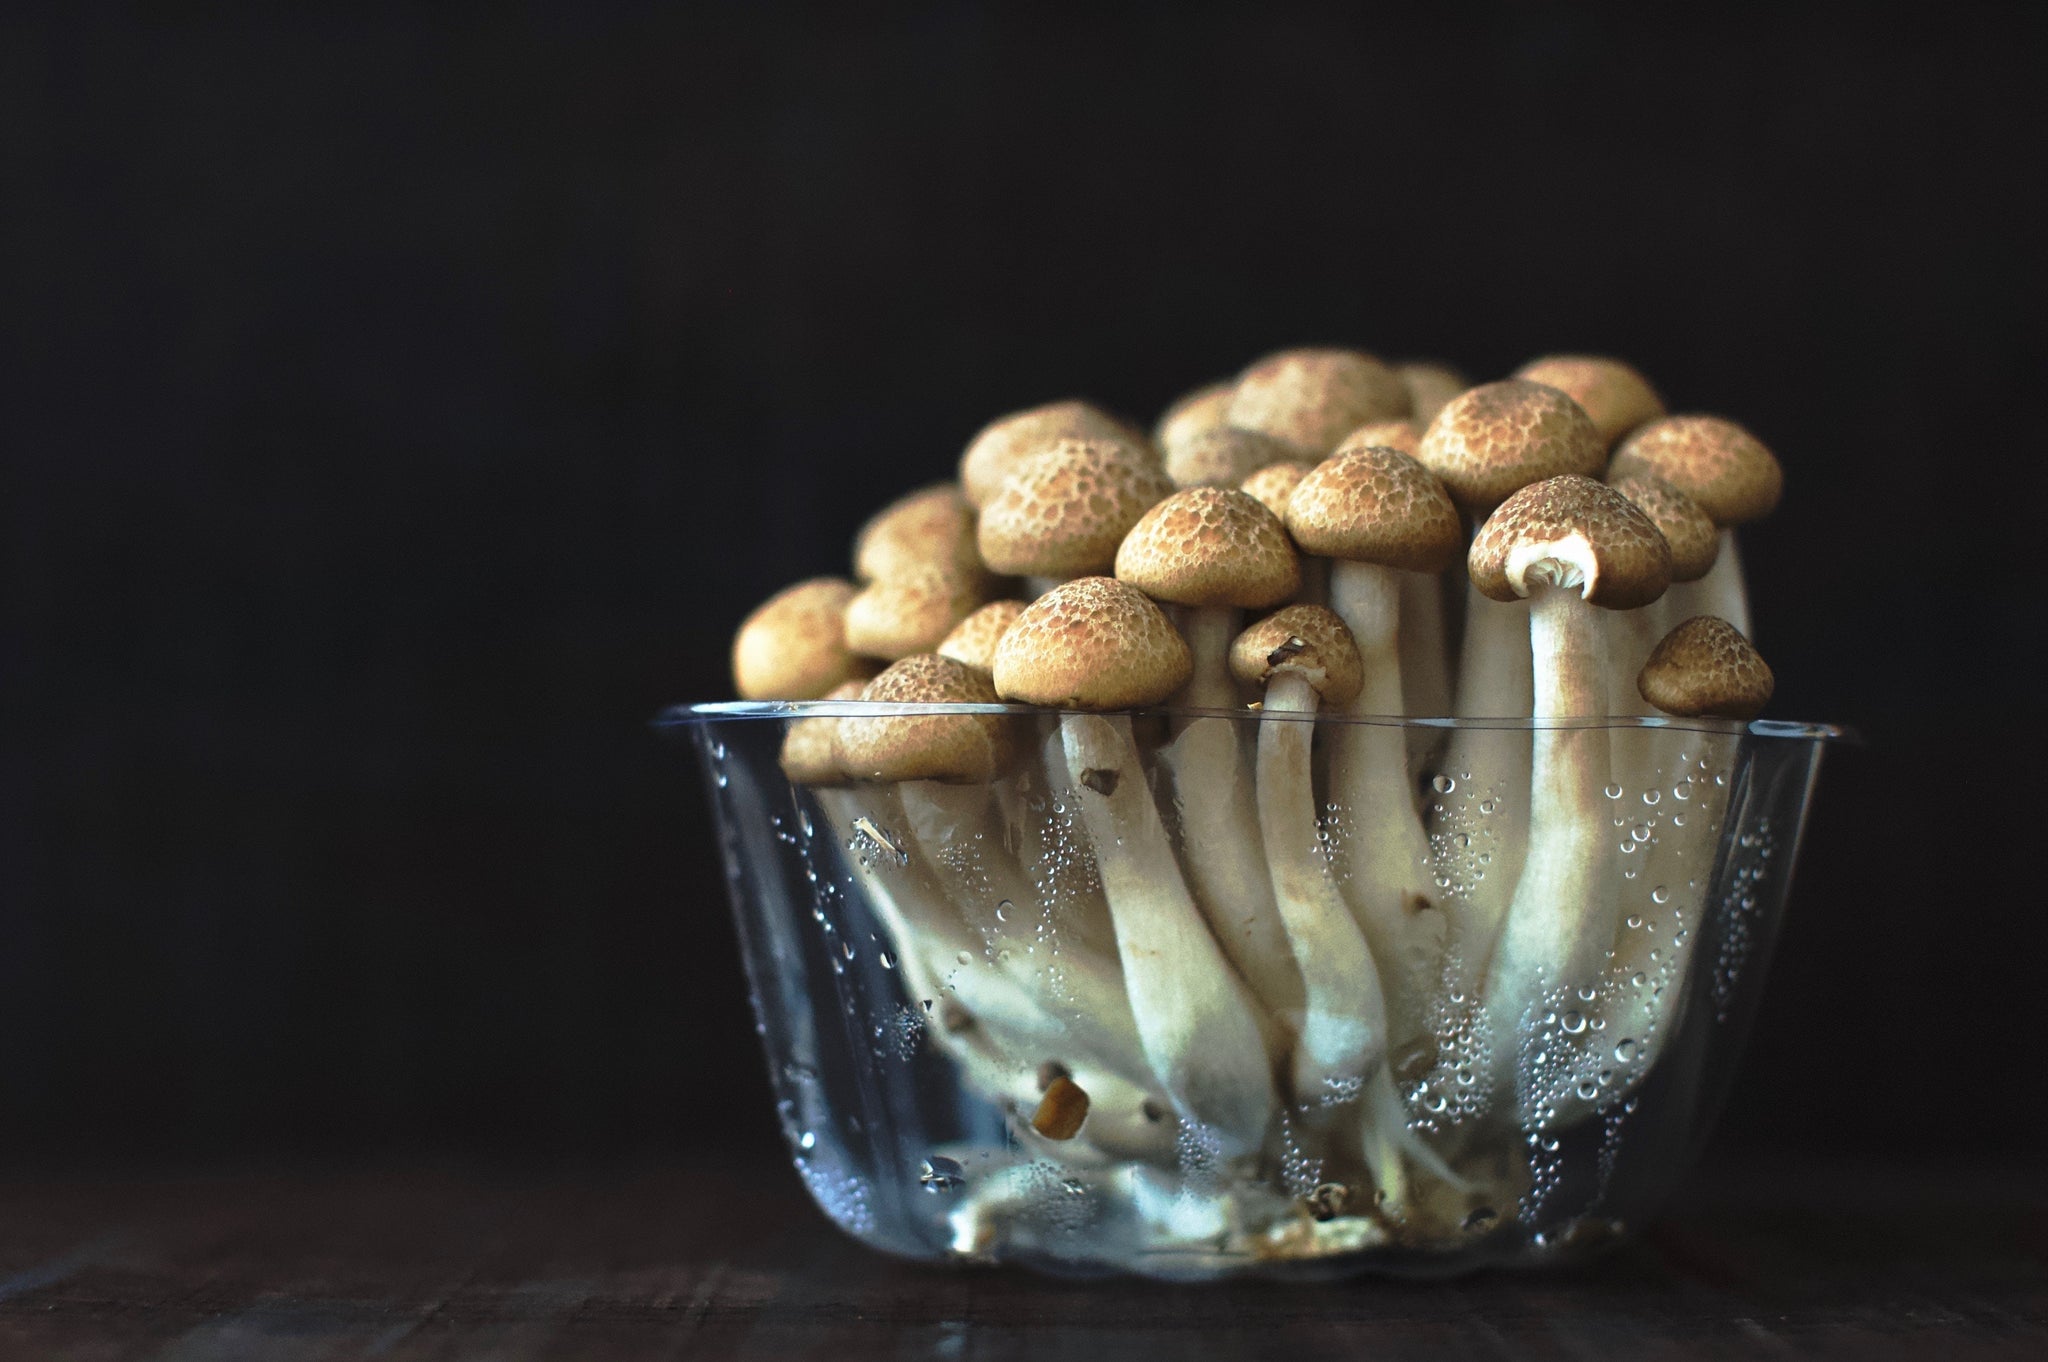 Oyster Mushrooms vs Shiitake: What's The Difference?